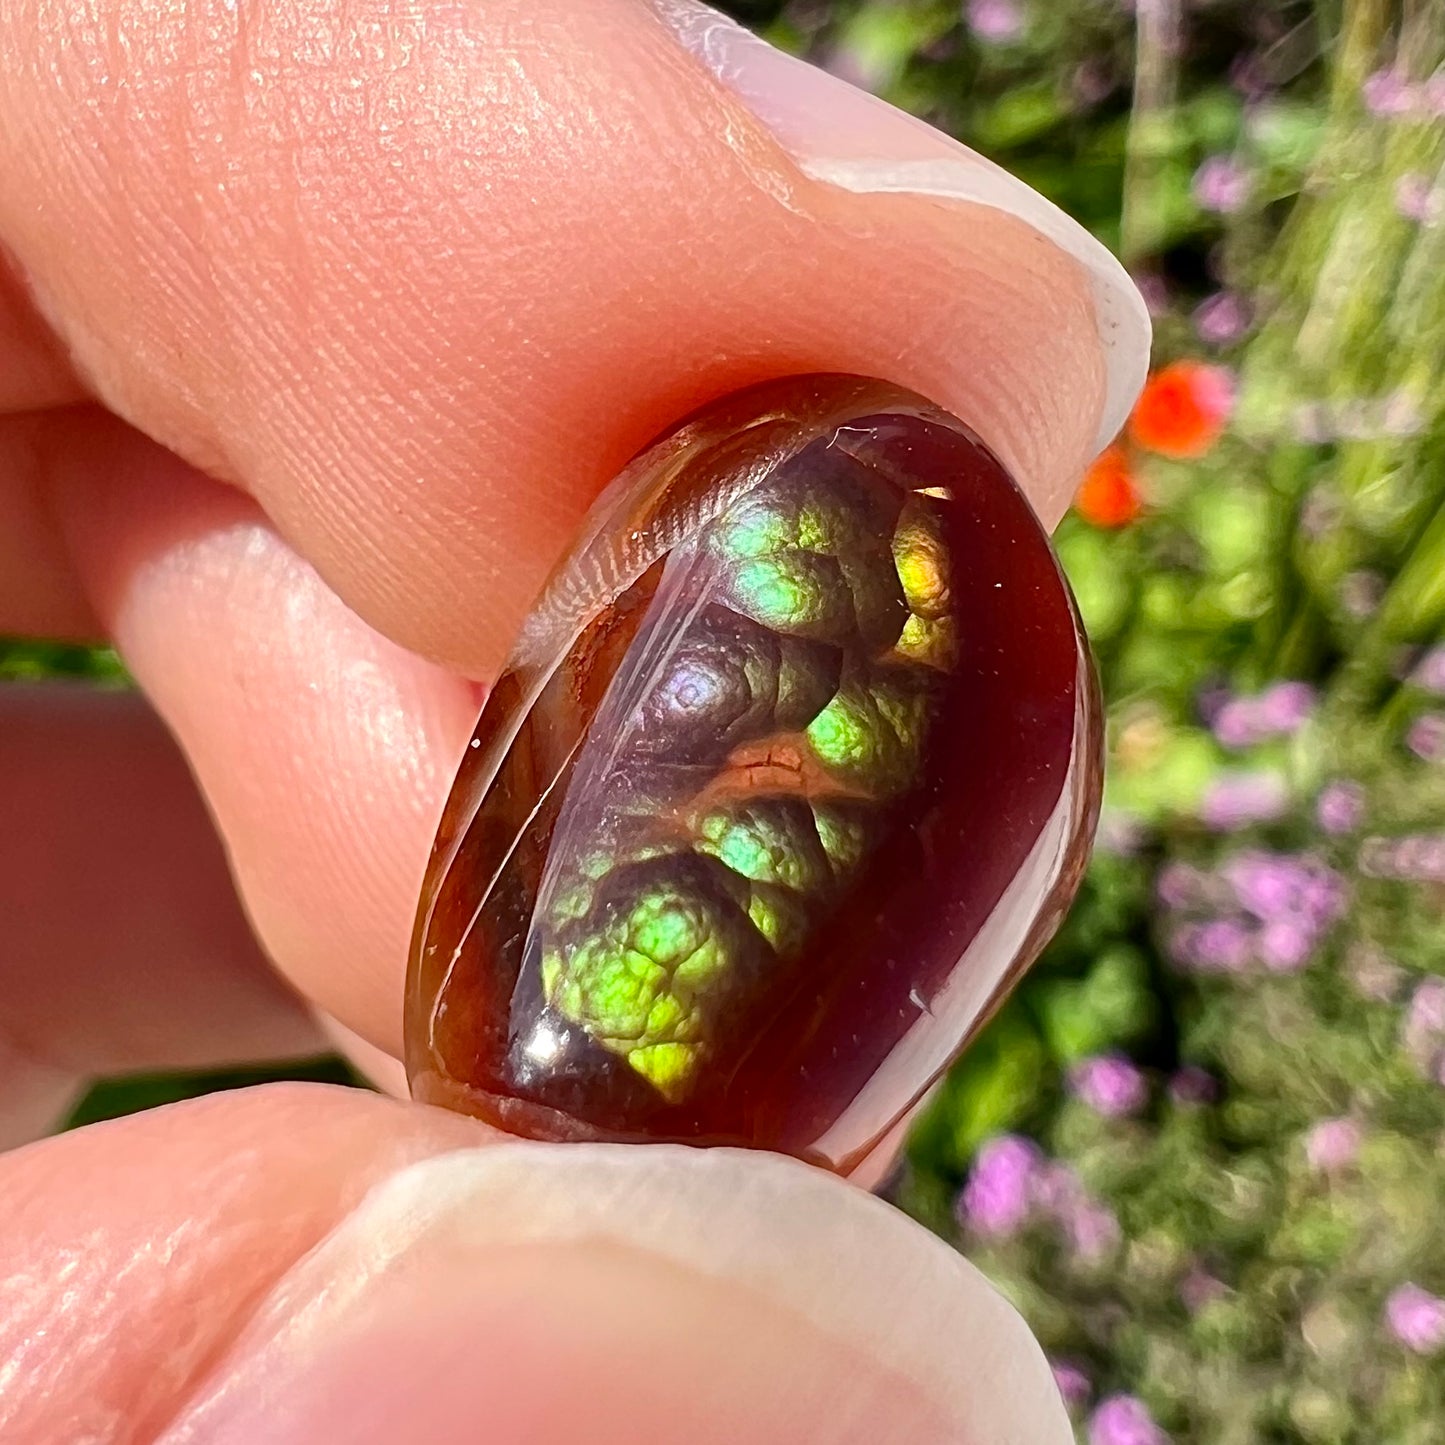 A loose, cabochon cut Mexican fire agate stone.  The stone's colors are predominantly bright green and blue.